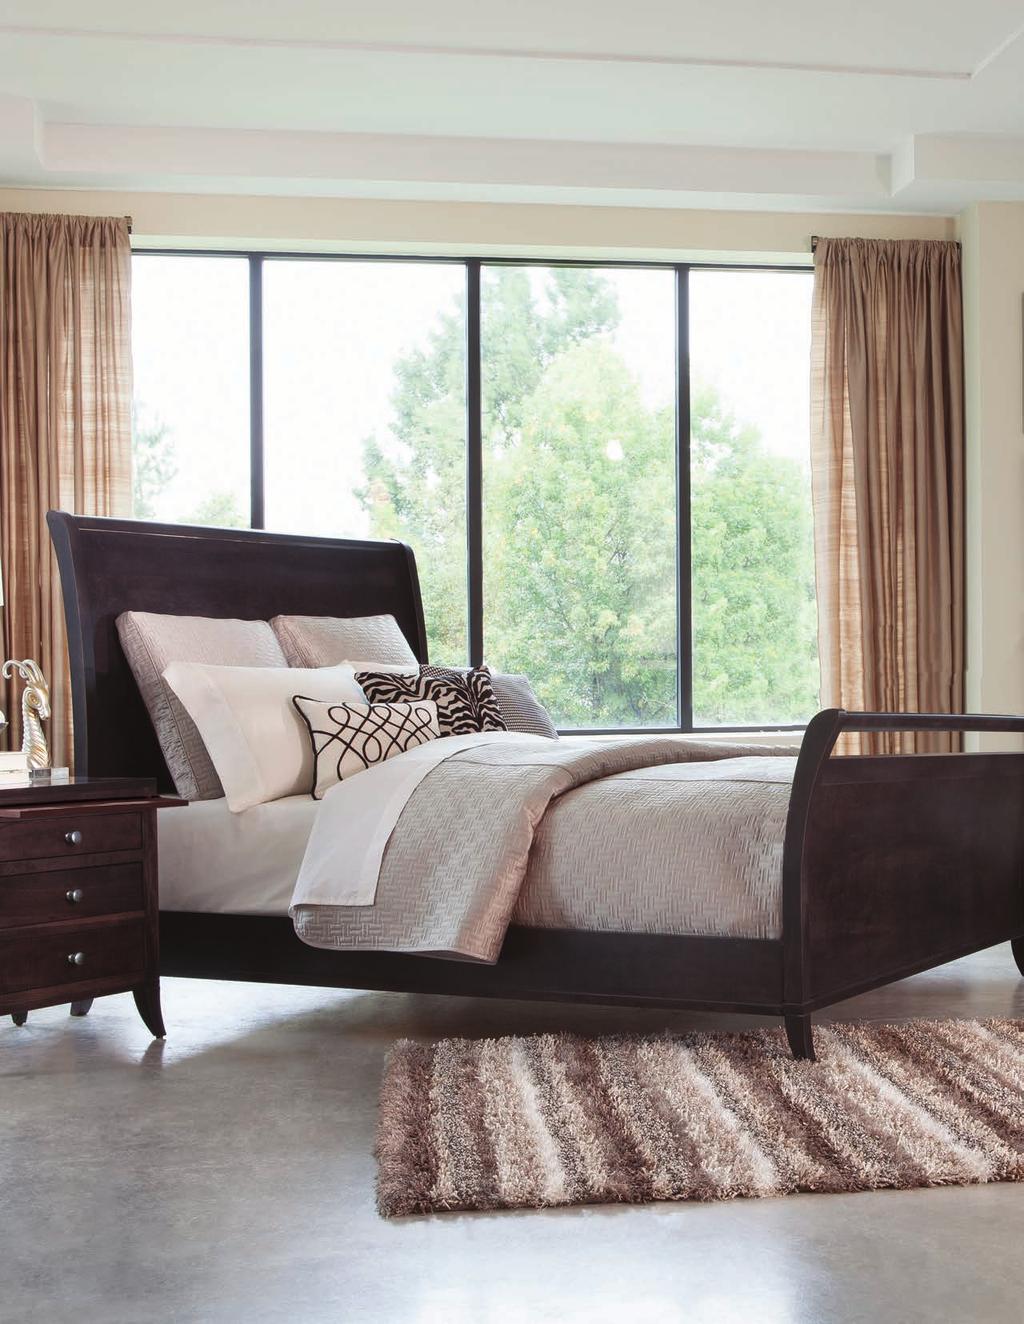 Picured: Adrienne Queen Sleigh Bed wih High Fooboard, iem 10113 is shown here.